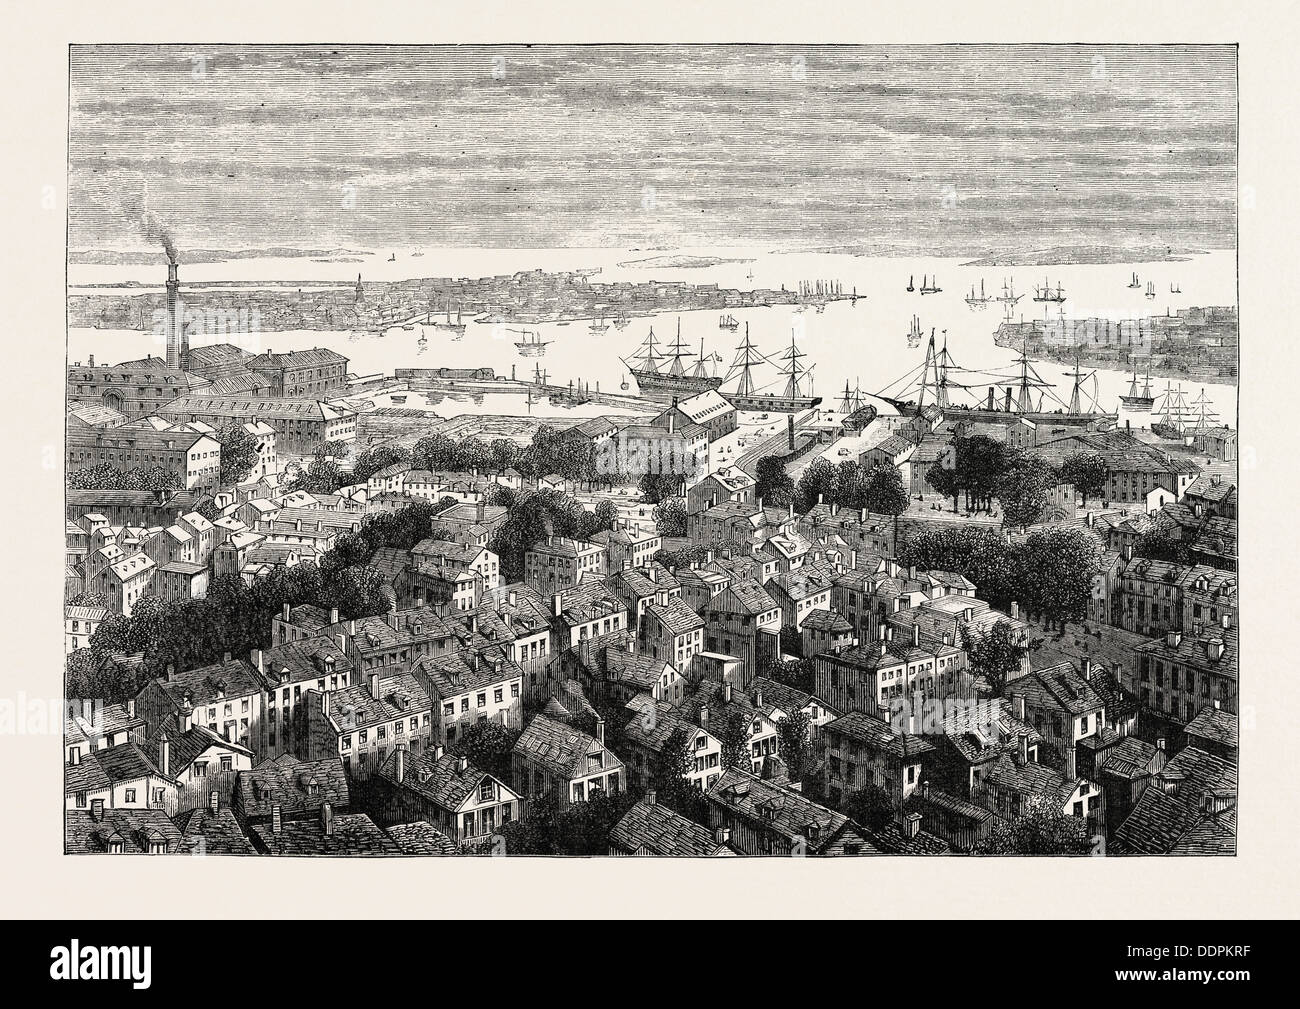 VIEW OF BOSTON FROM BUNKER'S HILL, UNITED STATES OF AMERICA, US, USA, 1870s engraving Stock Photo